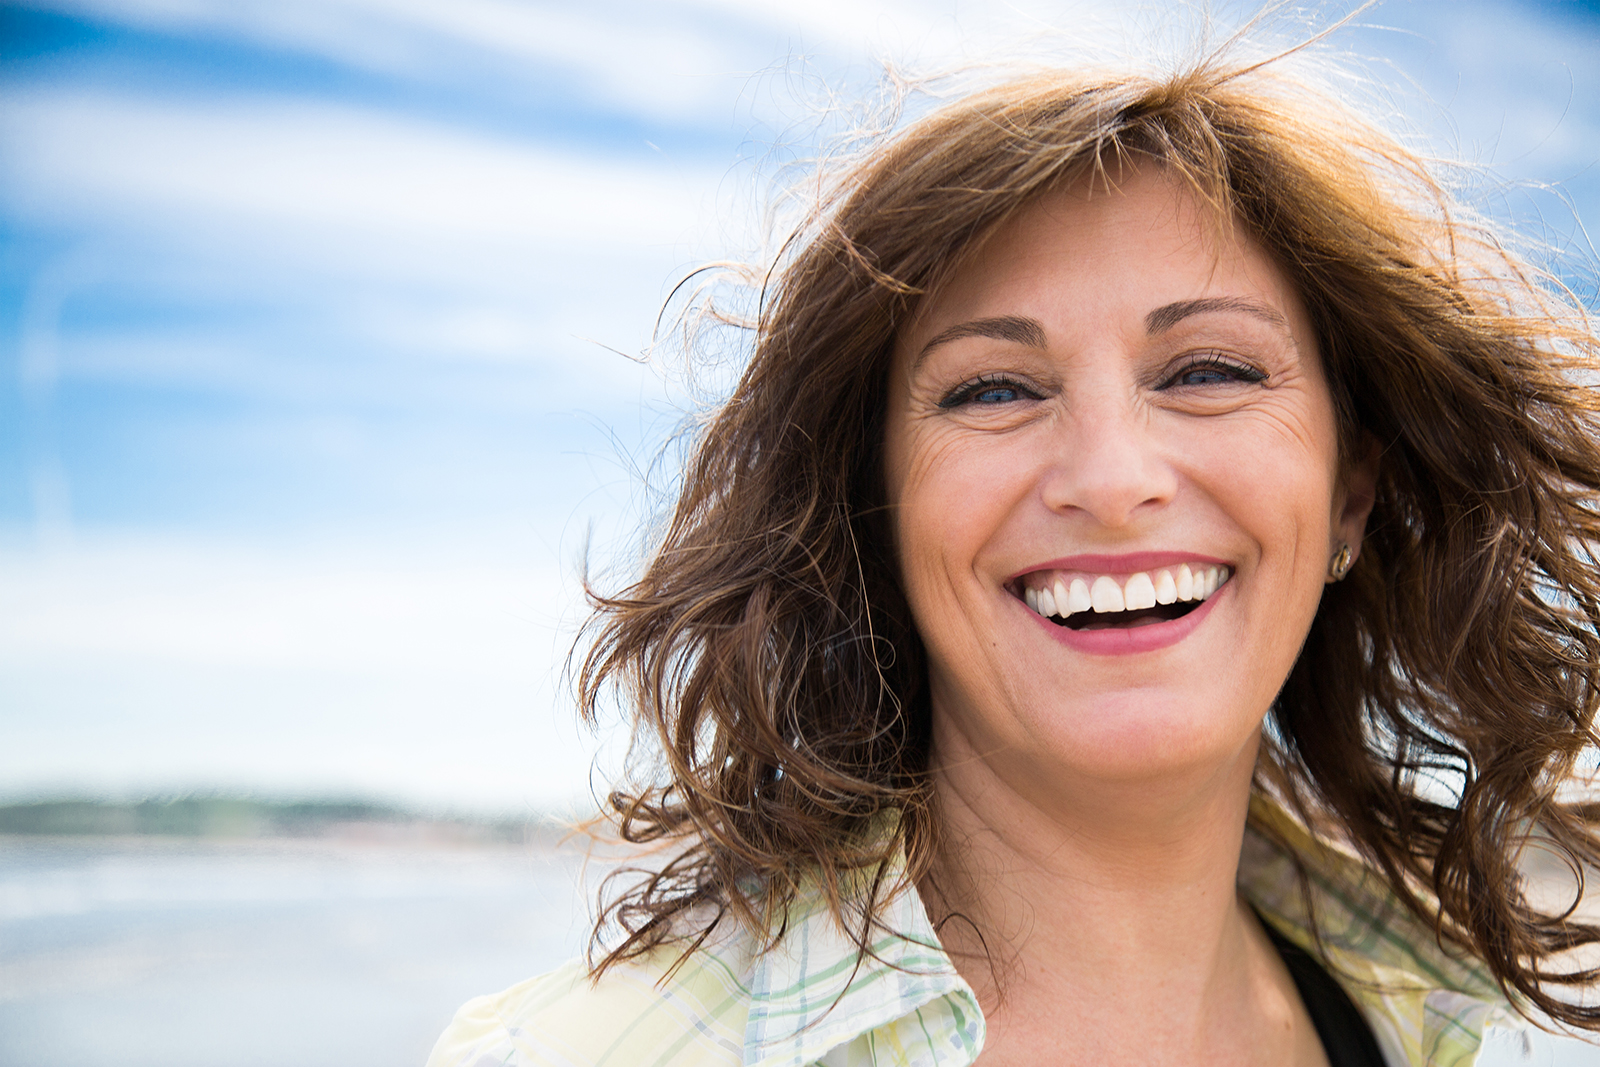 Ask Your Forney Dentist: What are Dental Implants?